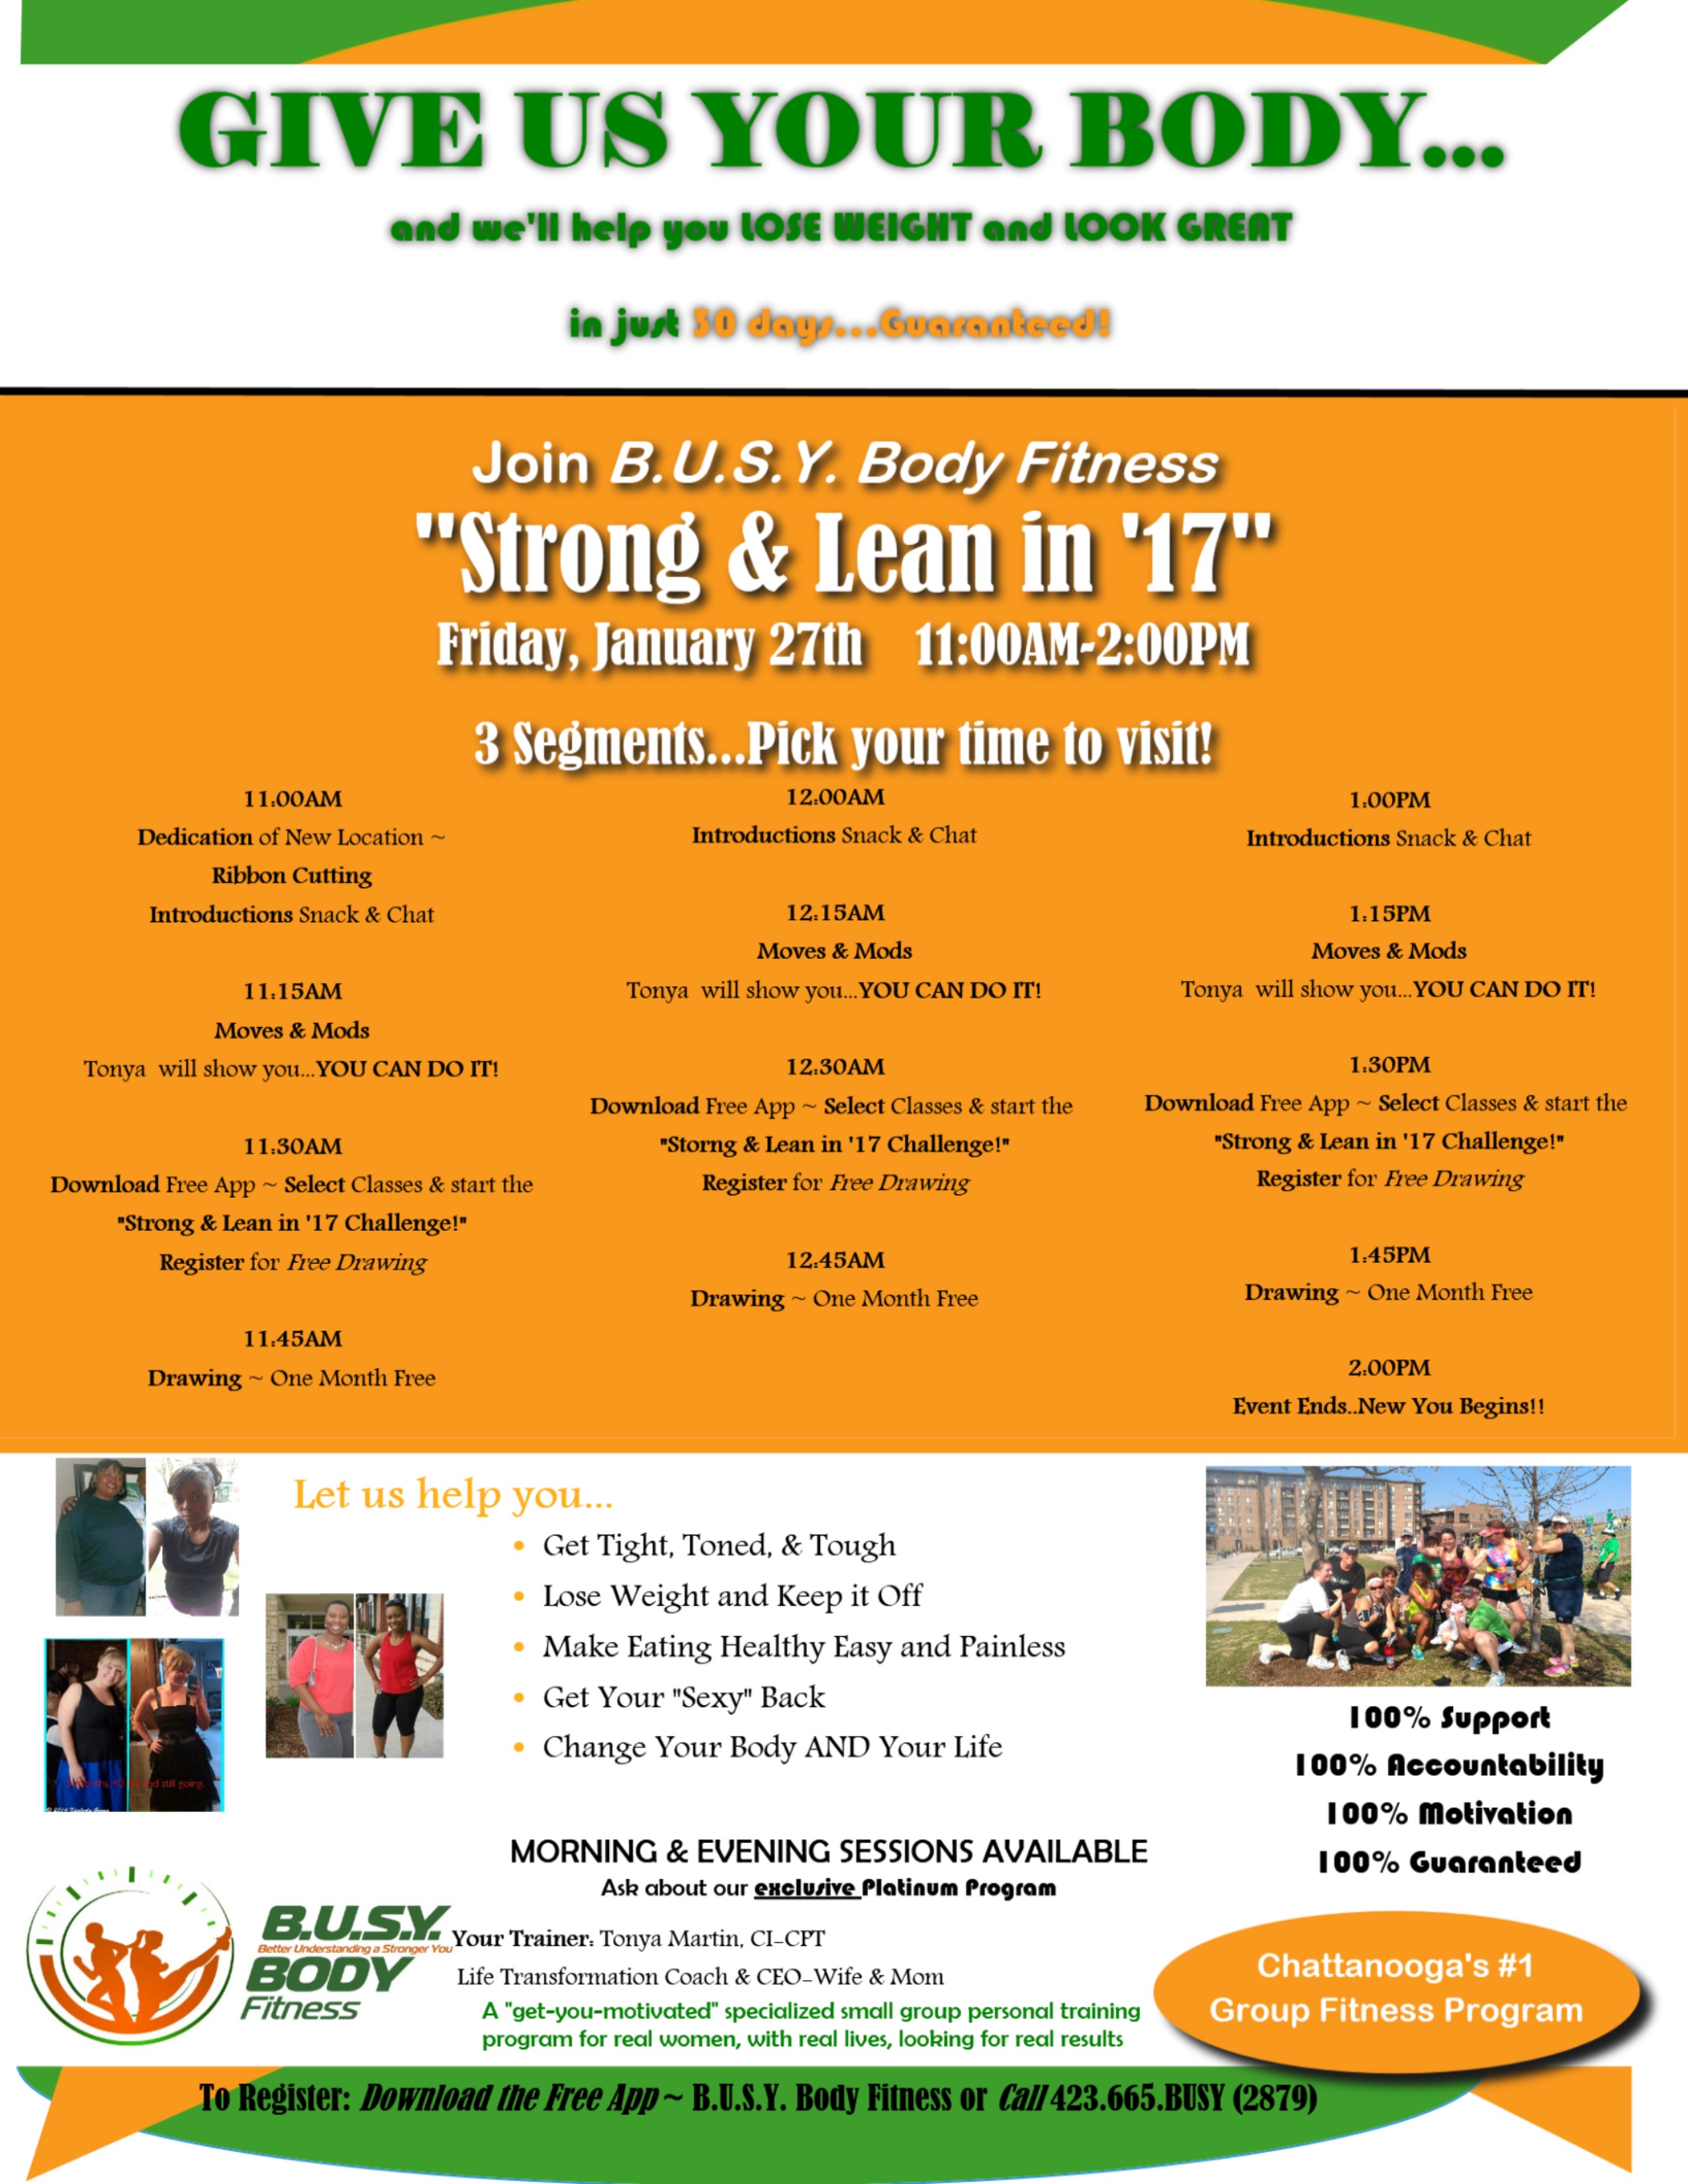 Busy Body Strong and Lean in 17 Flier 003